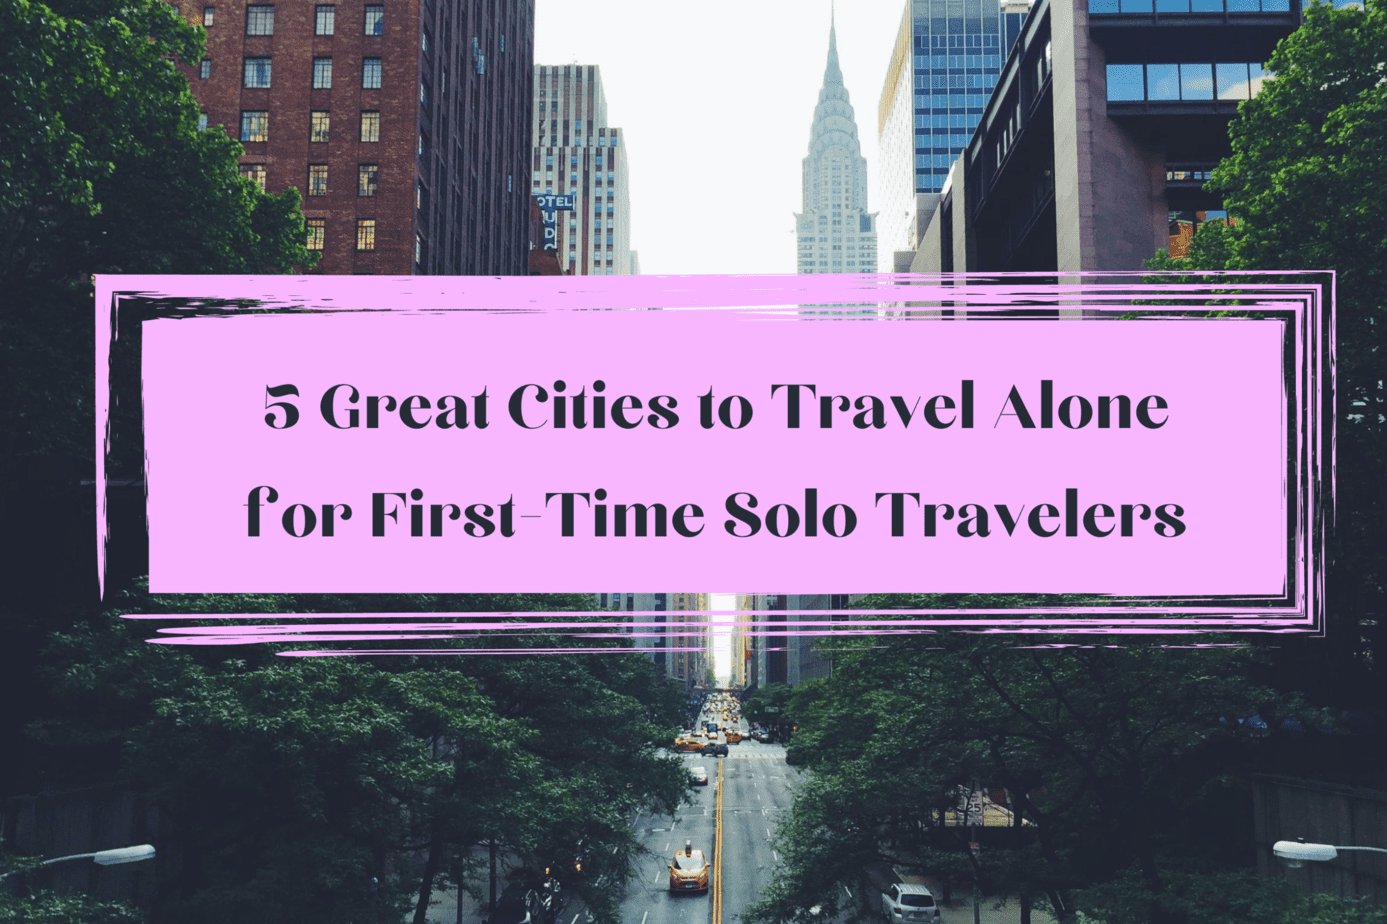 5 Grreat Cities to Travel Alone for First-Time Solo Travelers